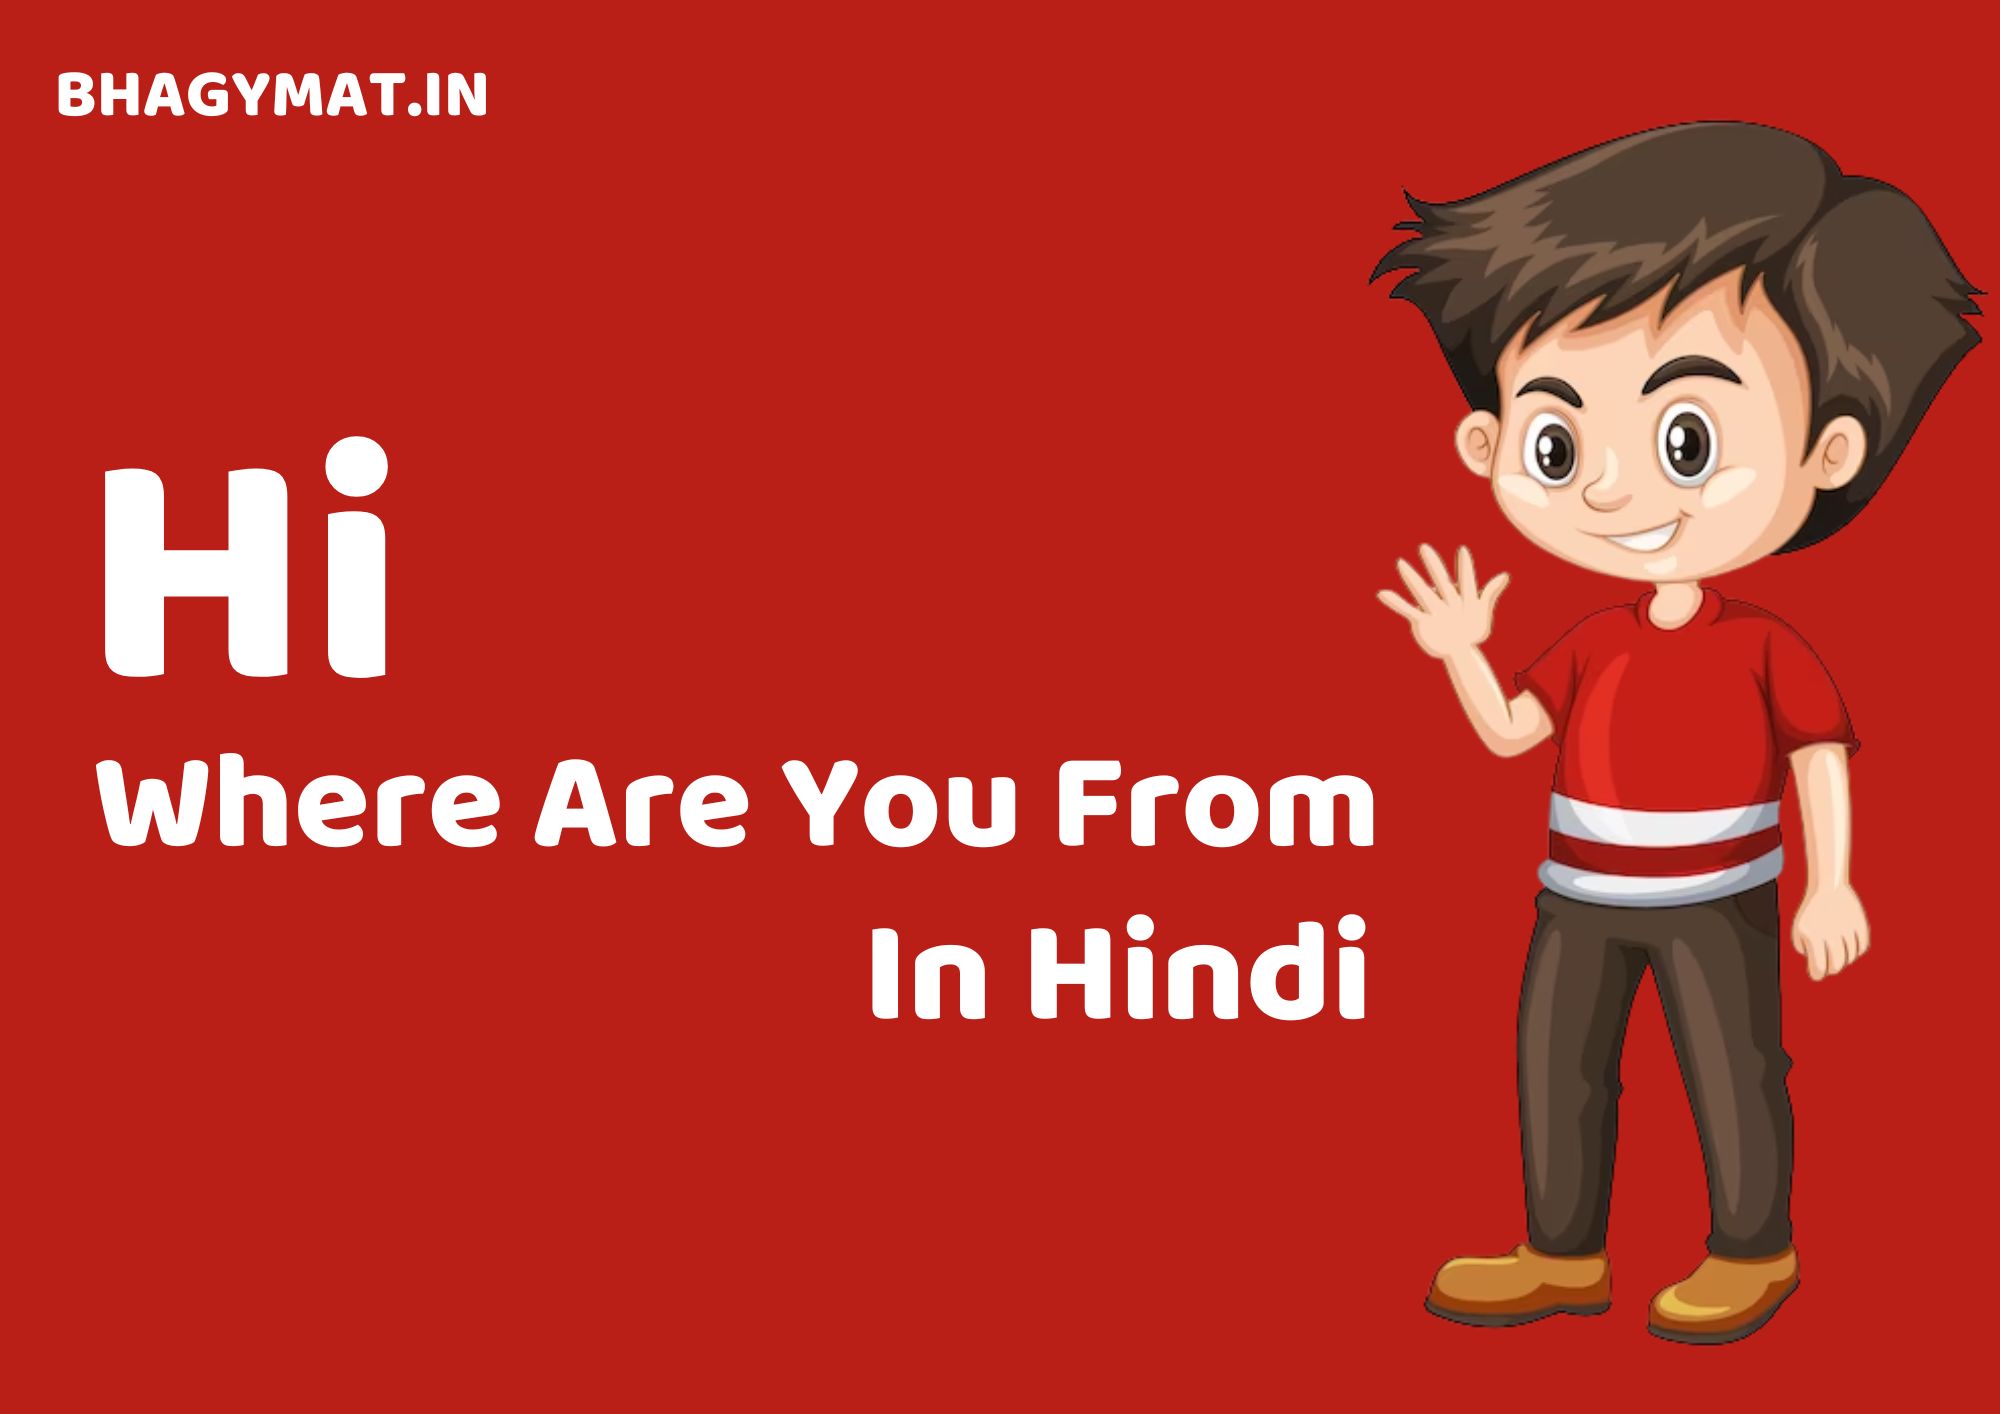 वेयर आर यू फ्रॉम इन हिंदी मीनिंग (Where Are You From Ka Hindi Meaning) - Where Are You From In Hindi Meaning